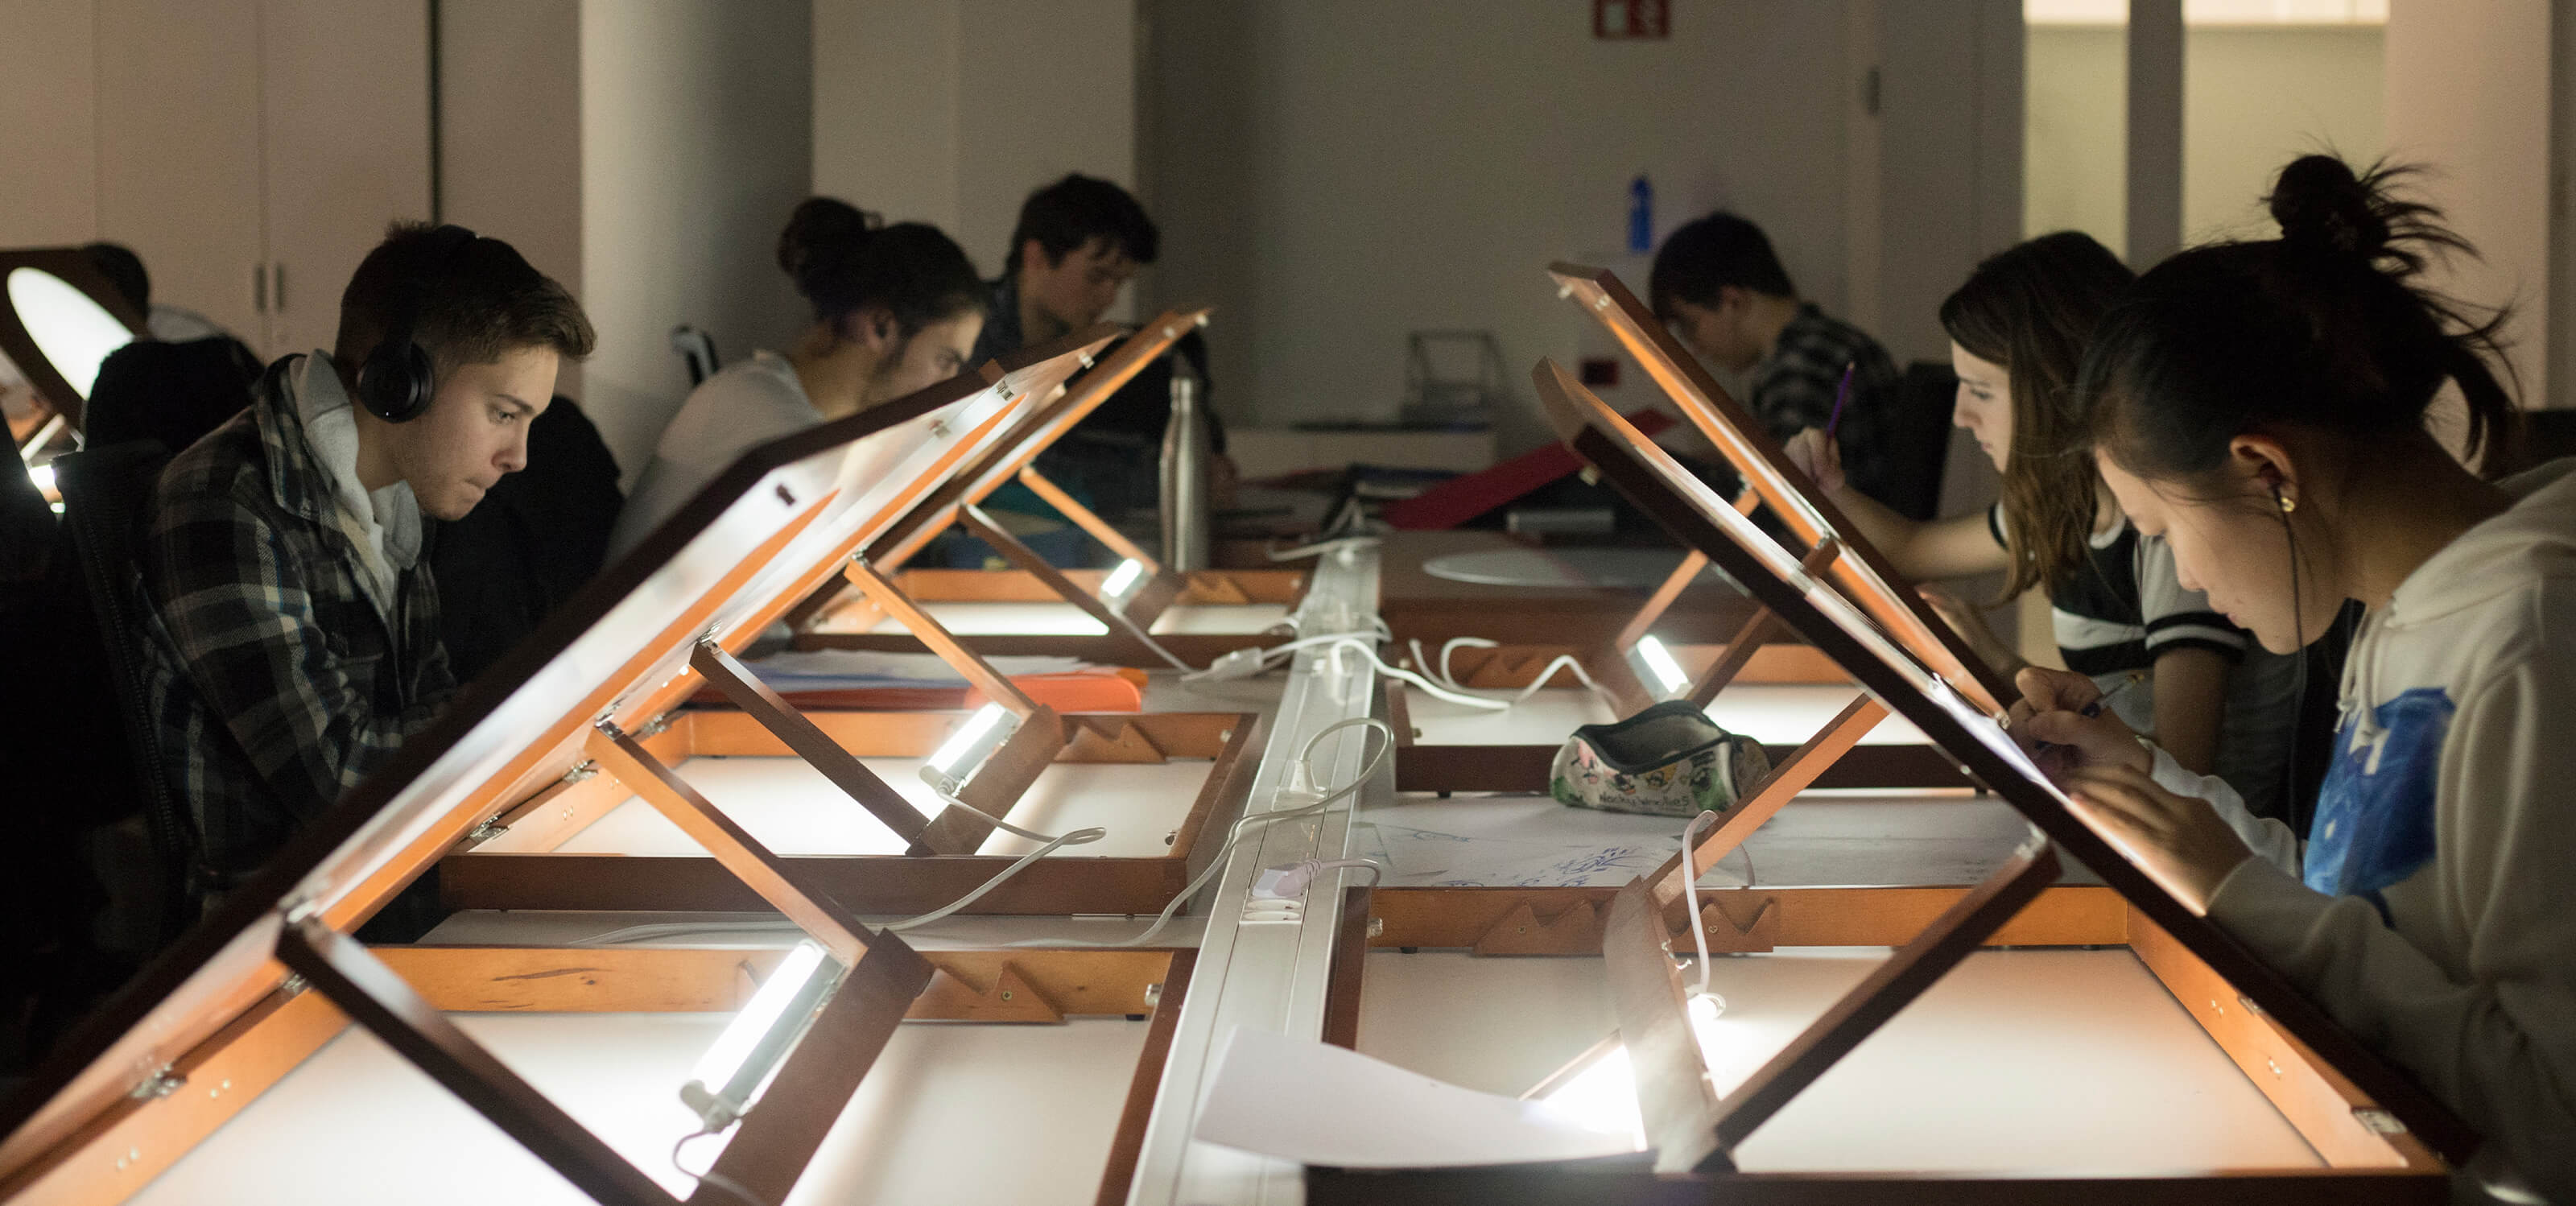 Several students use drawing tables with backlights to work on their designs.